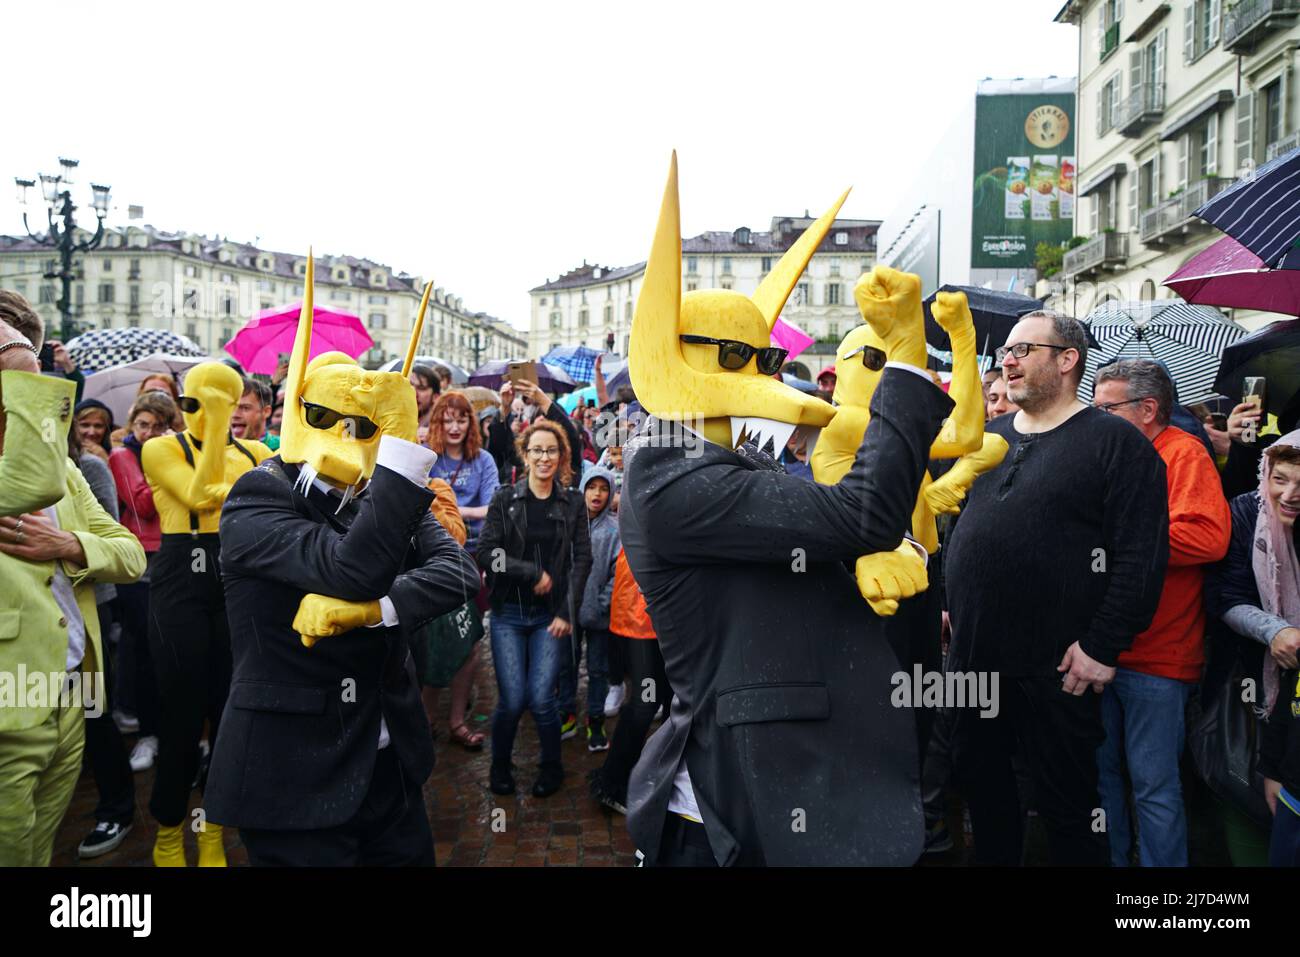 Flash mob among Subwoolfer fans to dance together Give That Wolf A Banana. The EuroVision Song Contest 2022 in Turin, Italy.  TURIN, ITALY - MAY 2022 Stock Photo